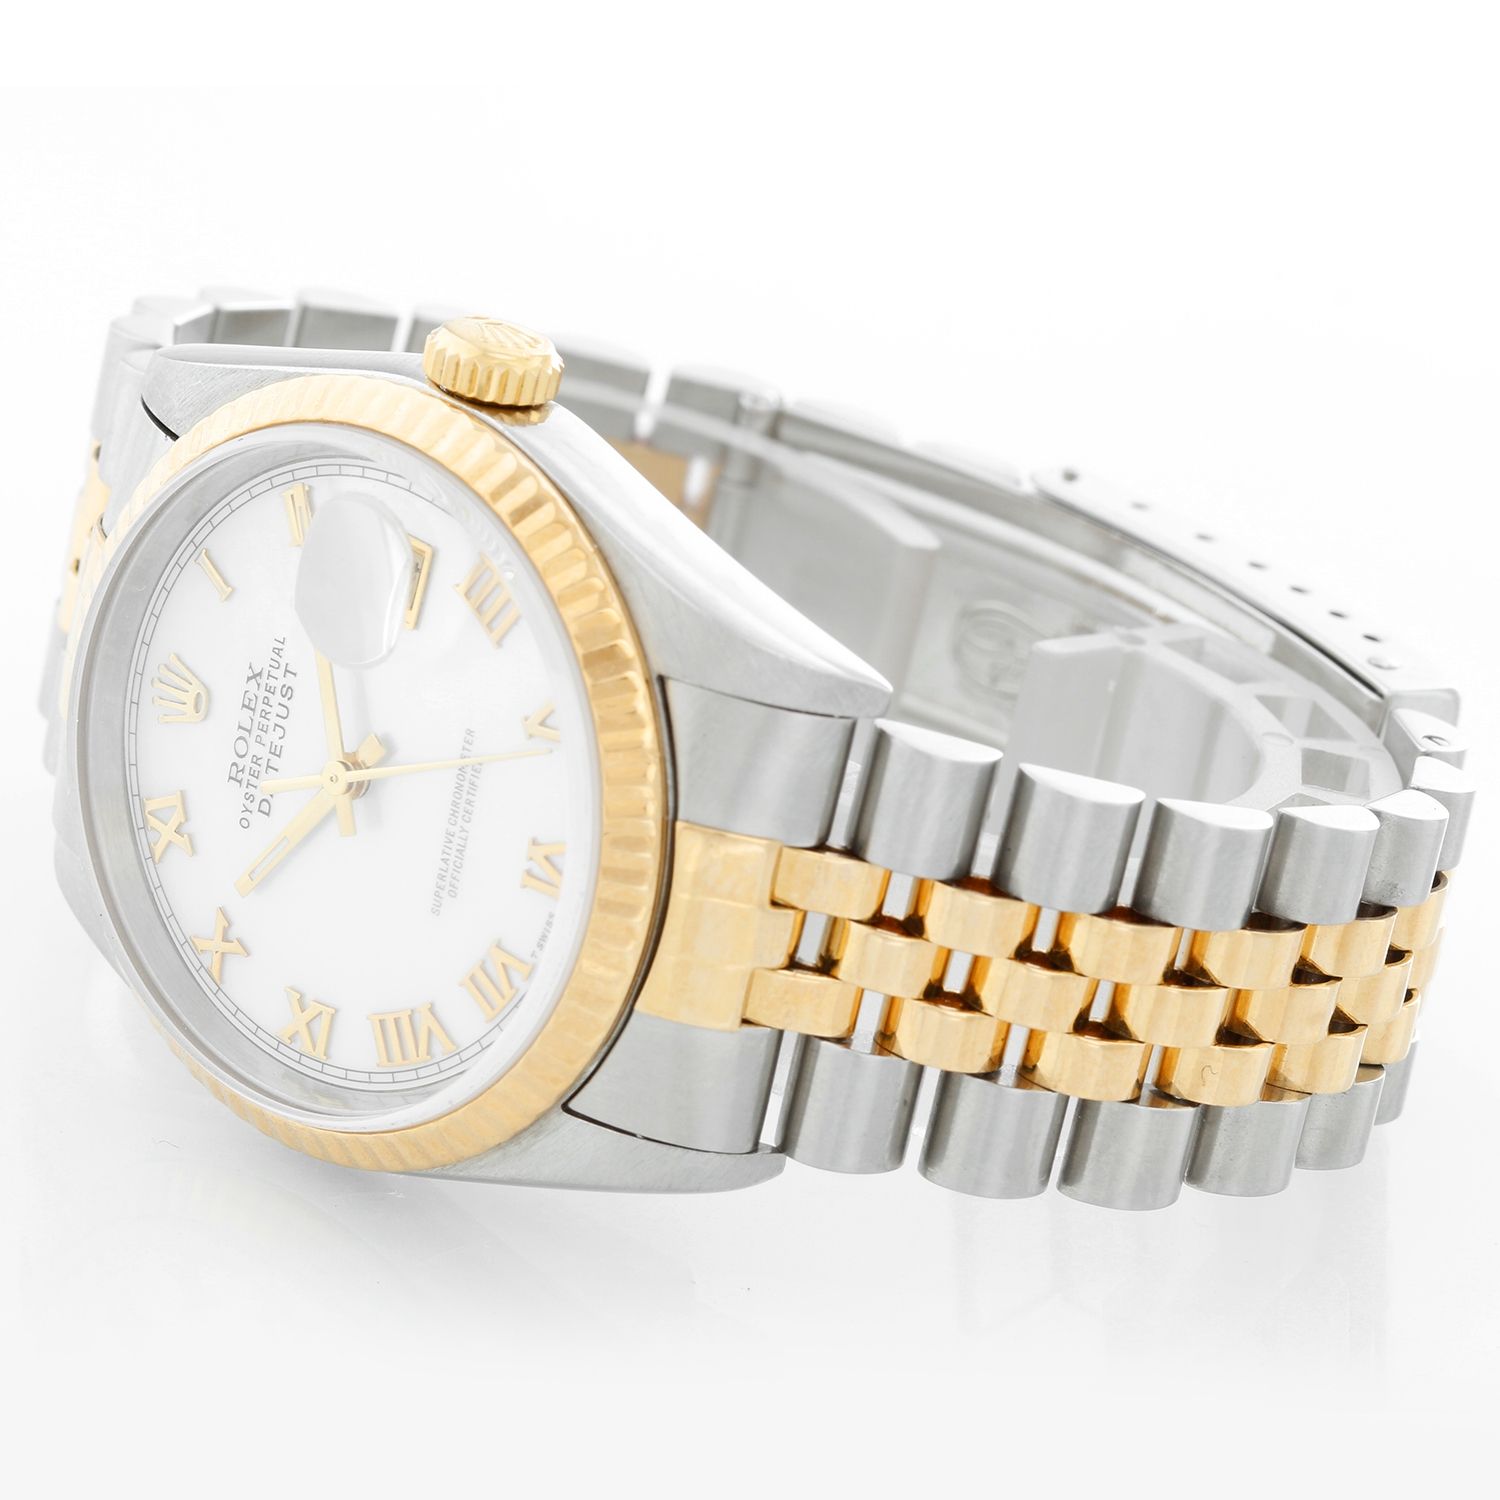 Rolex Men's Datejust 16233 Steel and Gold Mother of Pearl Dial Watch